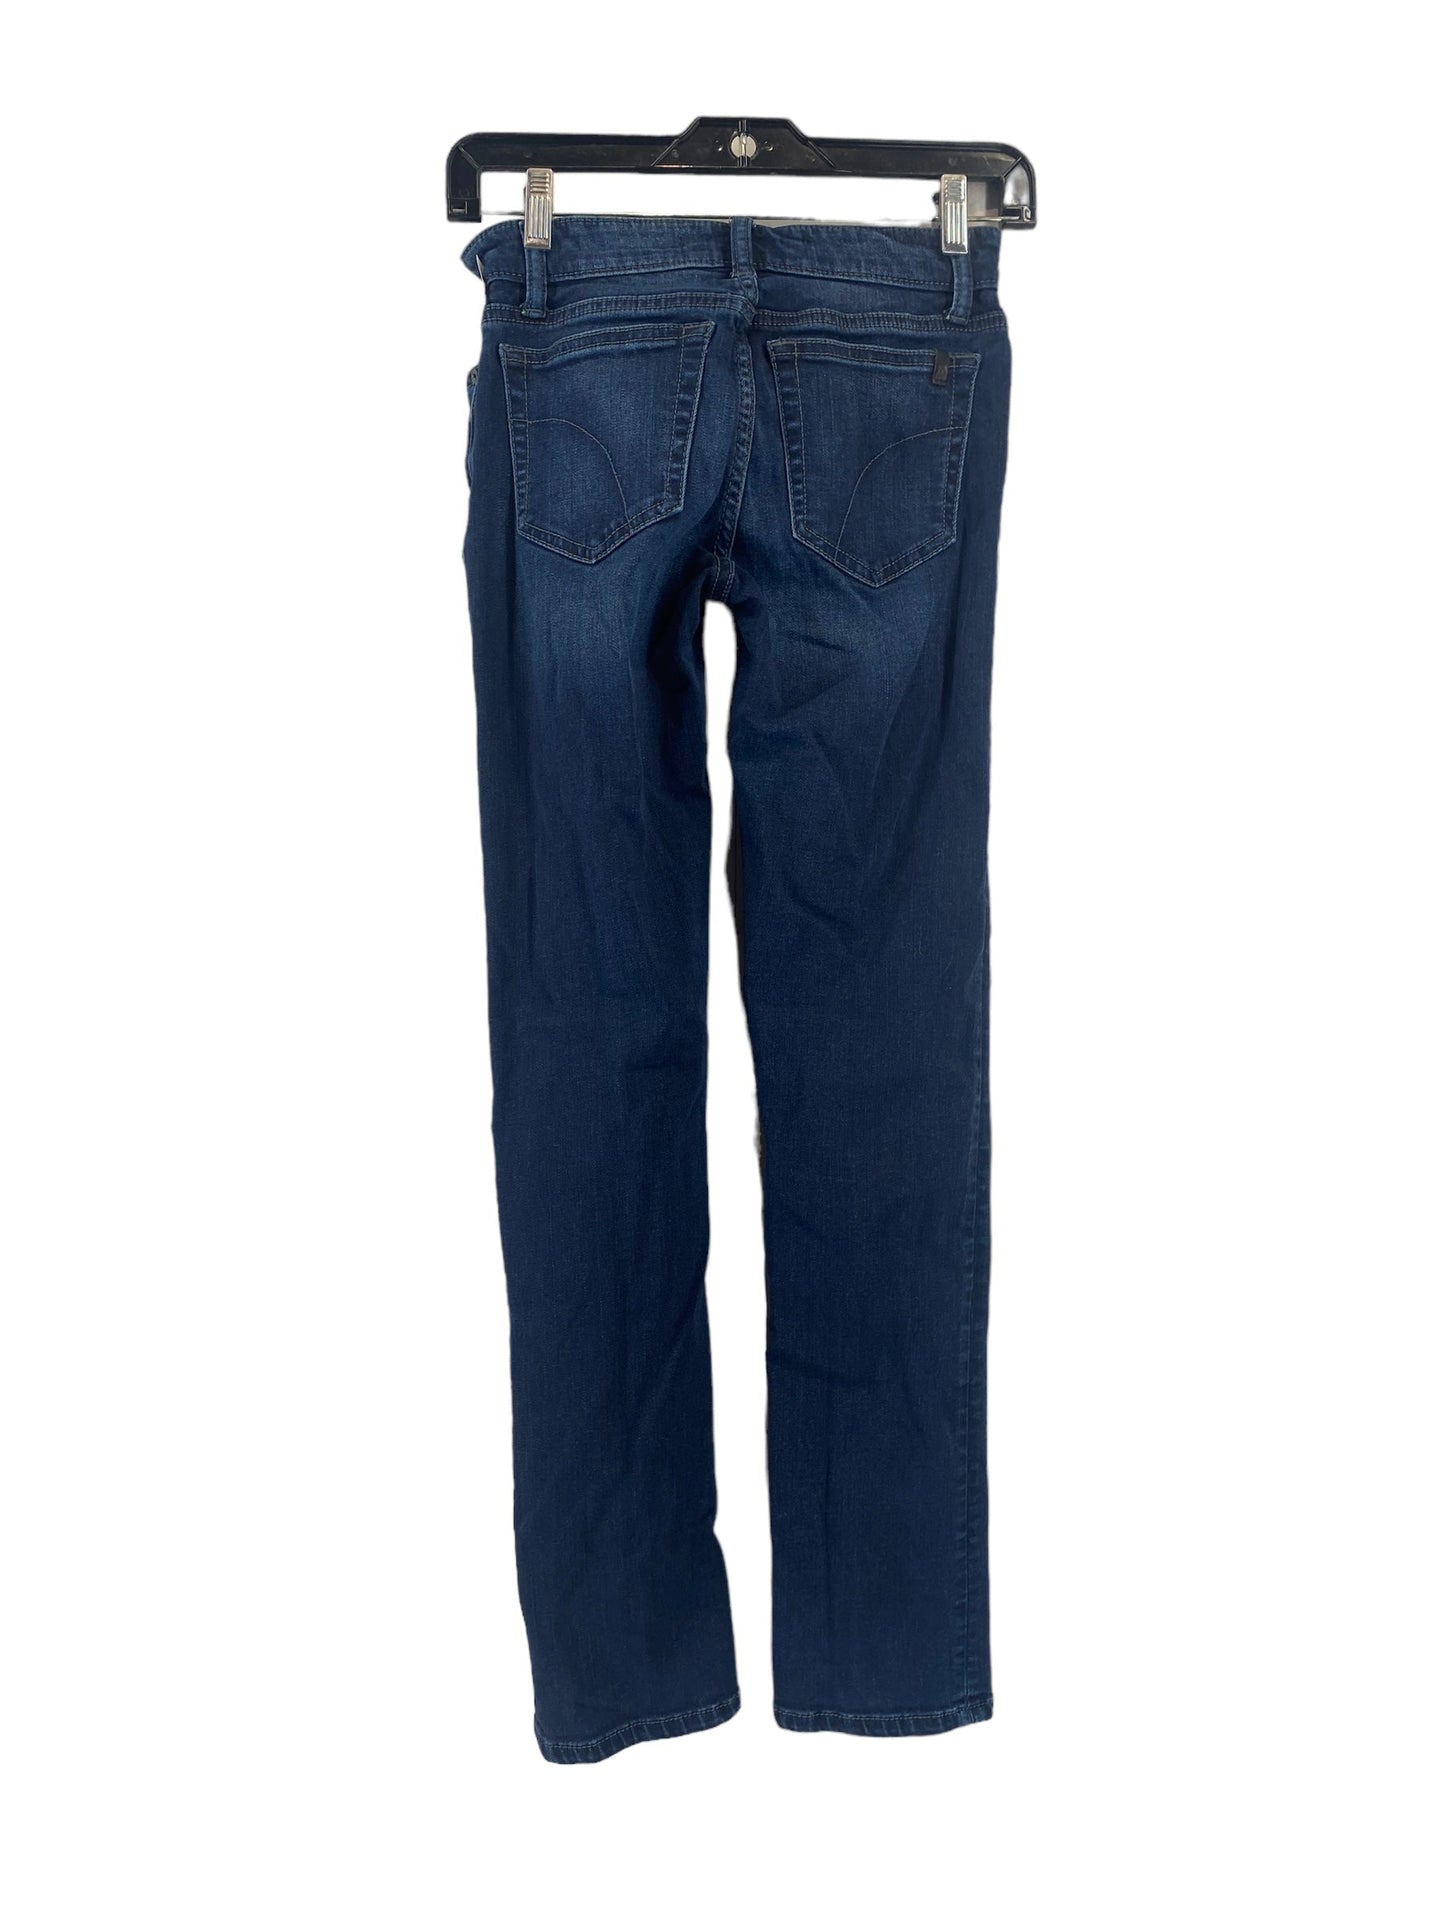 Jeans Skinny By Joes Jeans  Size: 24